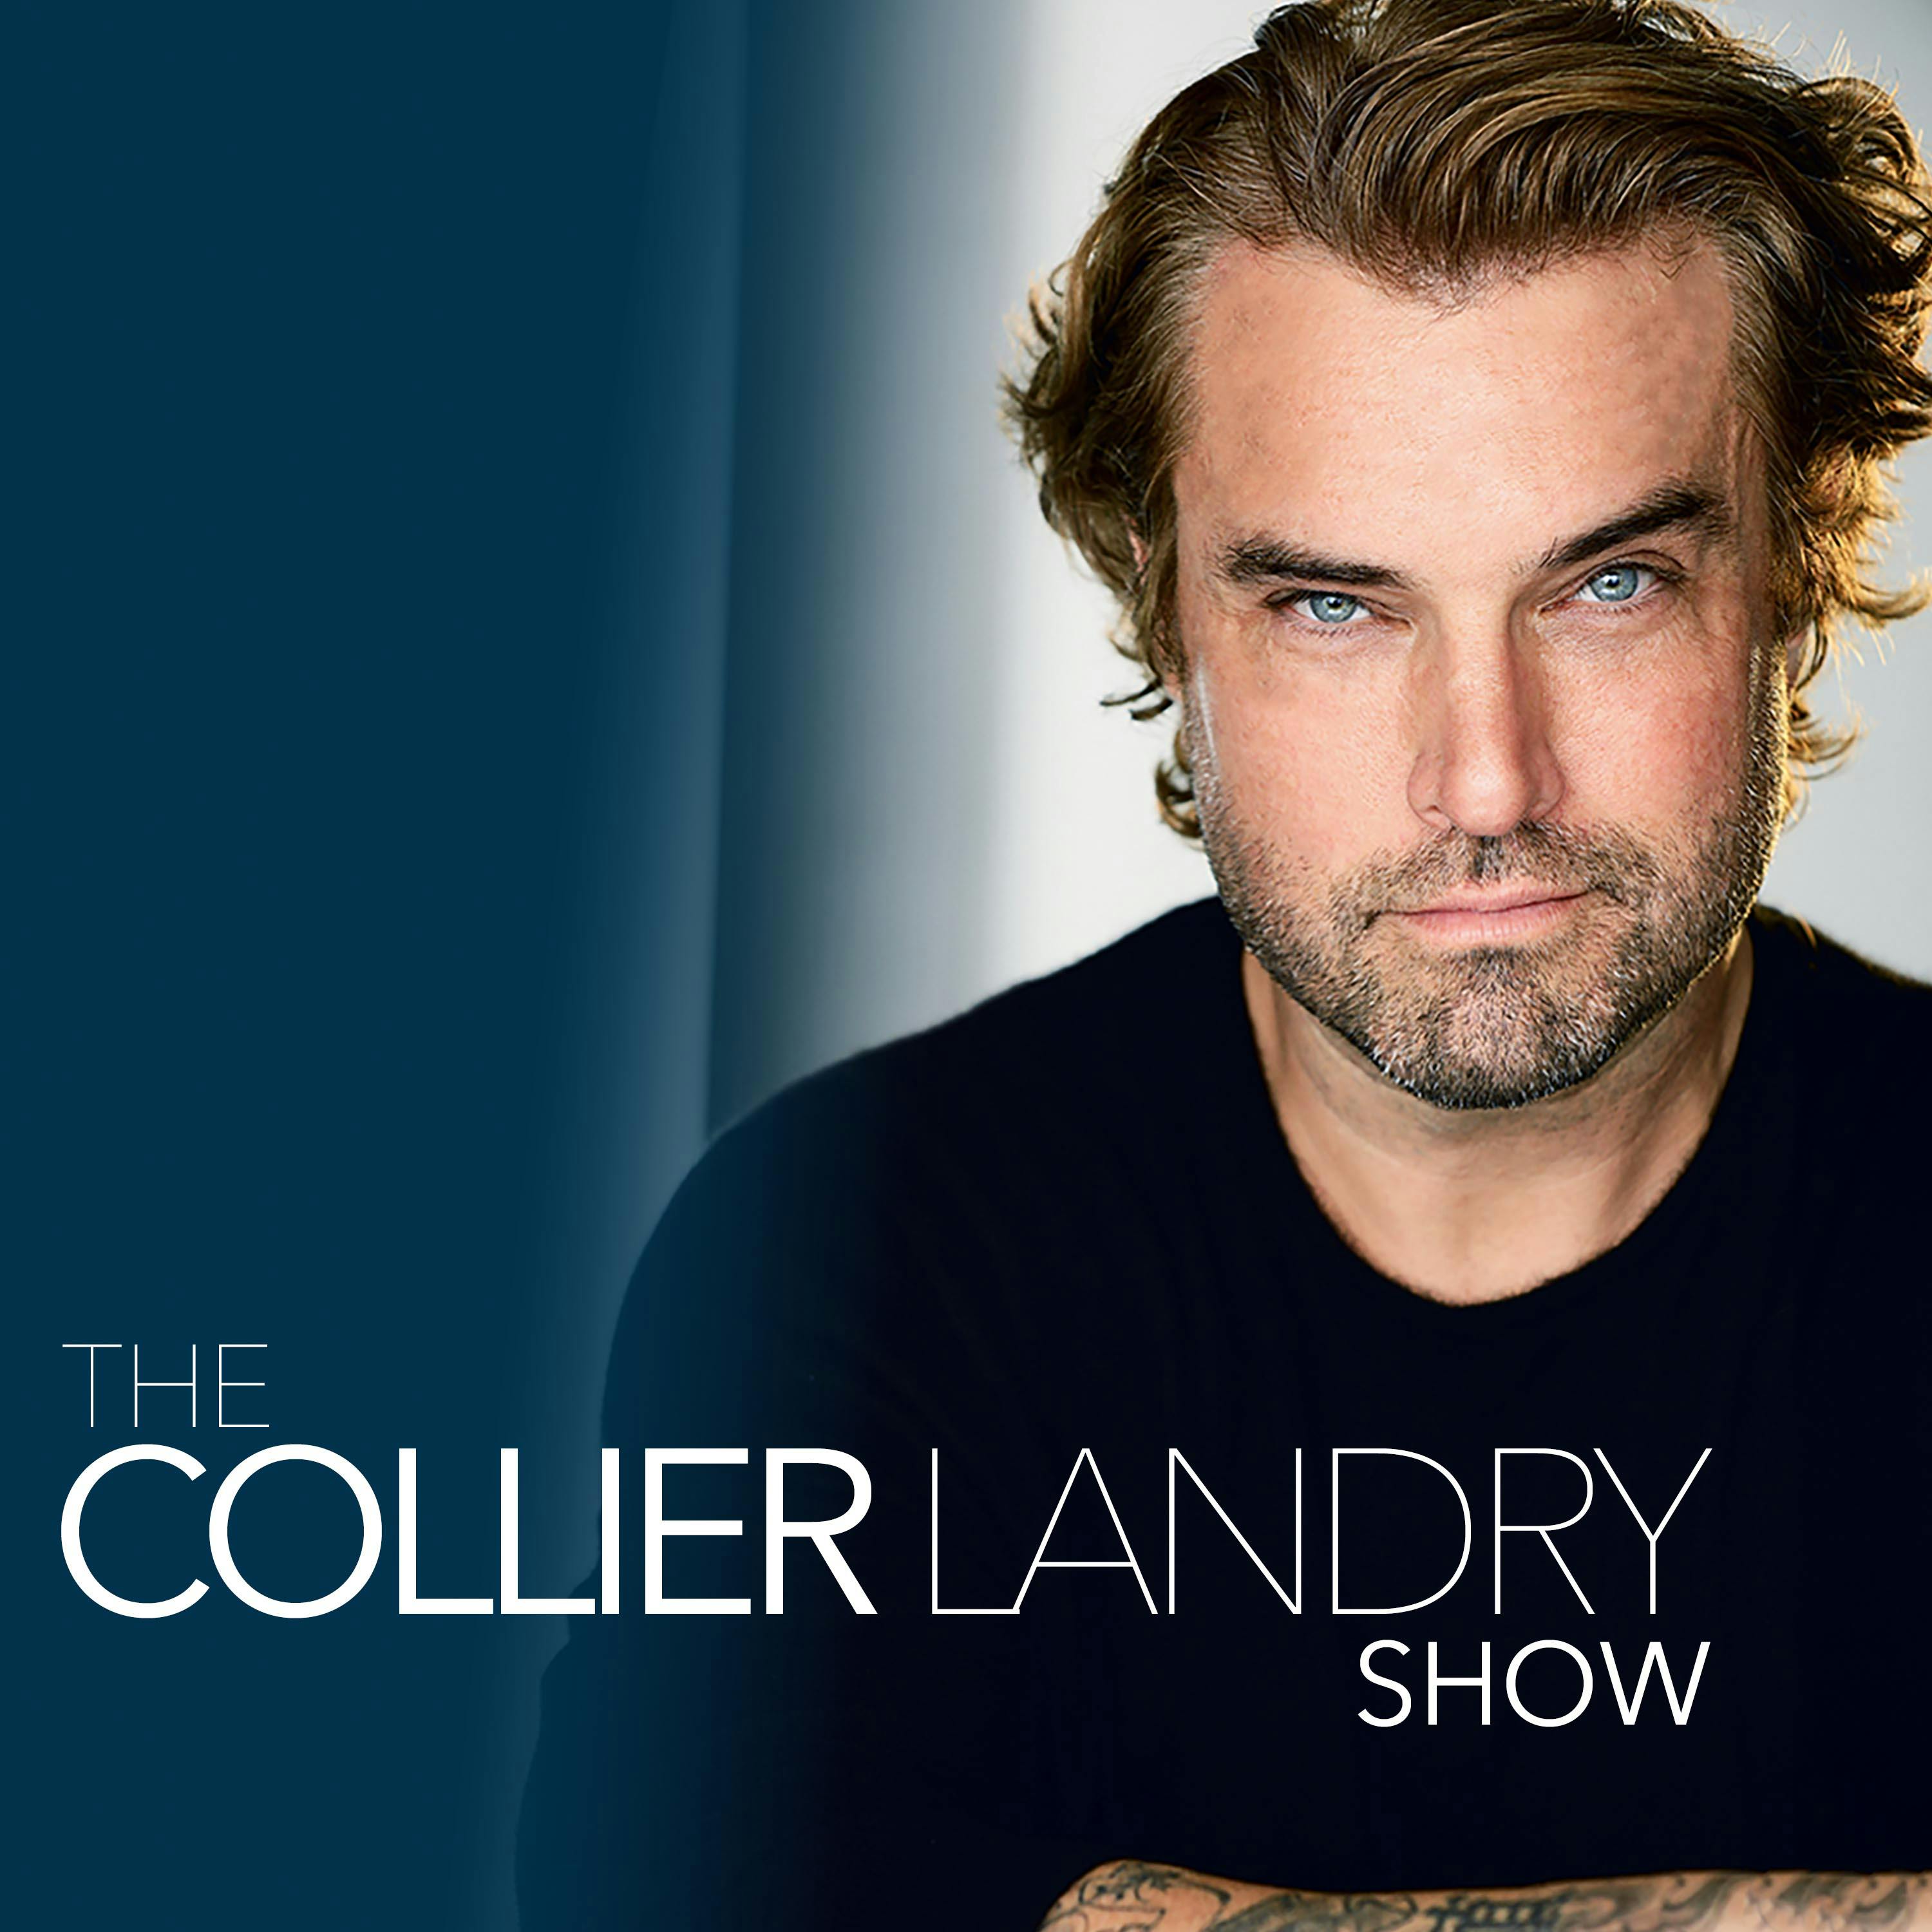 The Collier Landry Show podcast show image